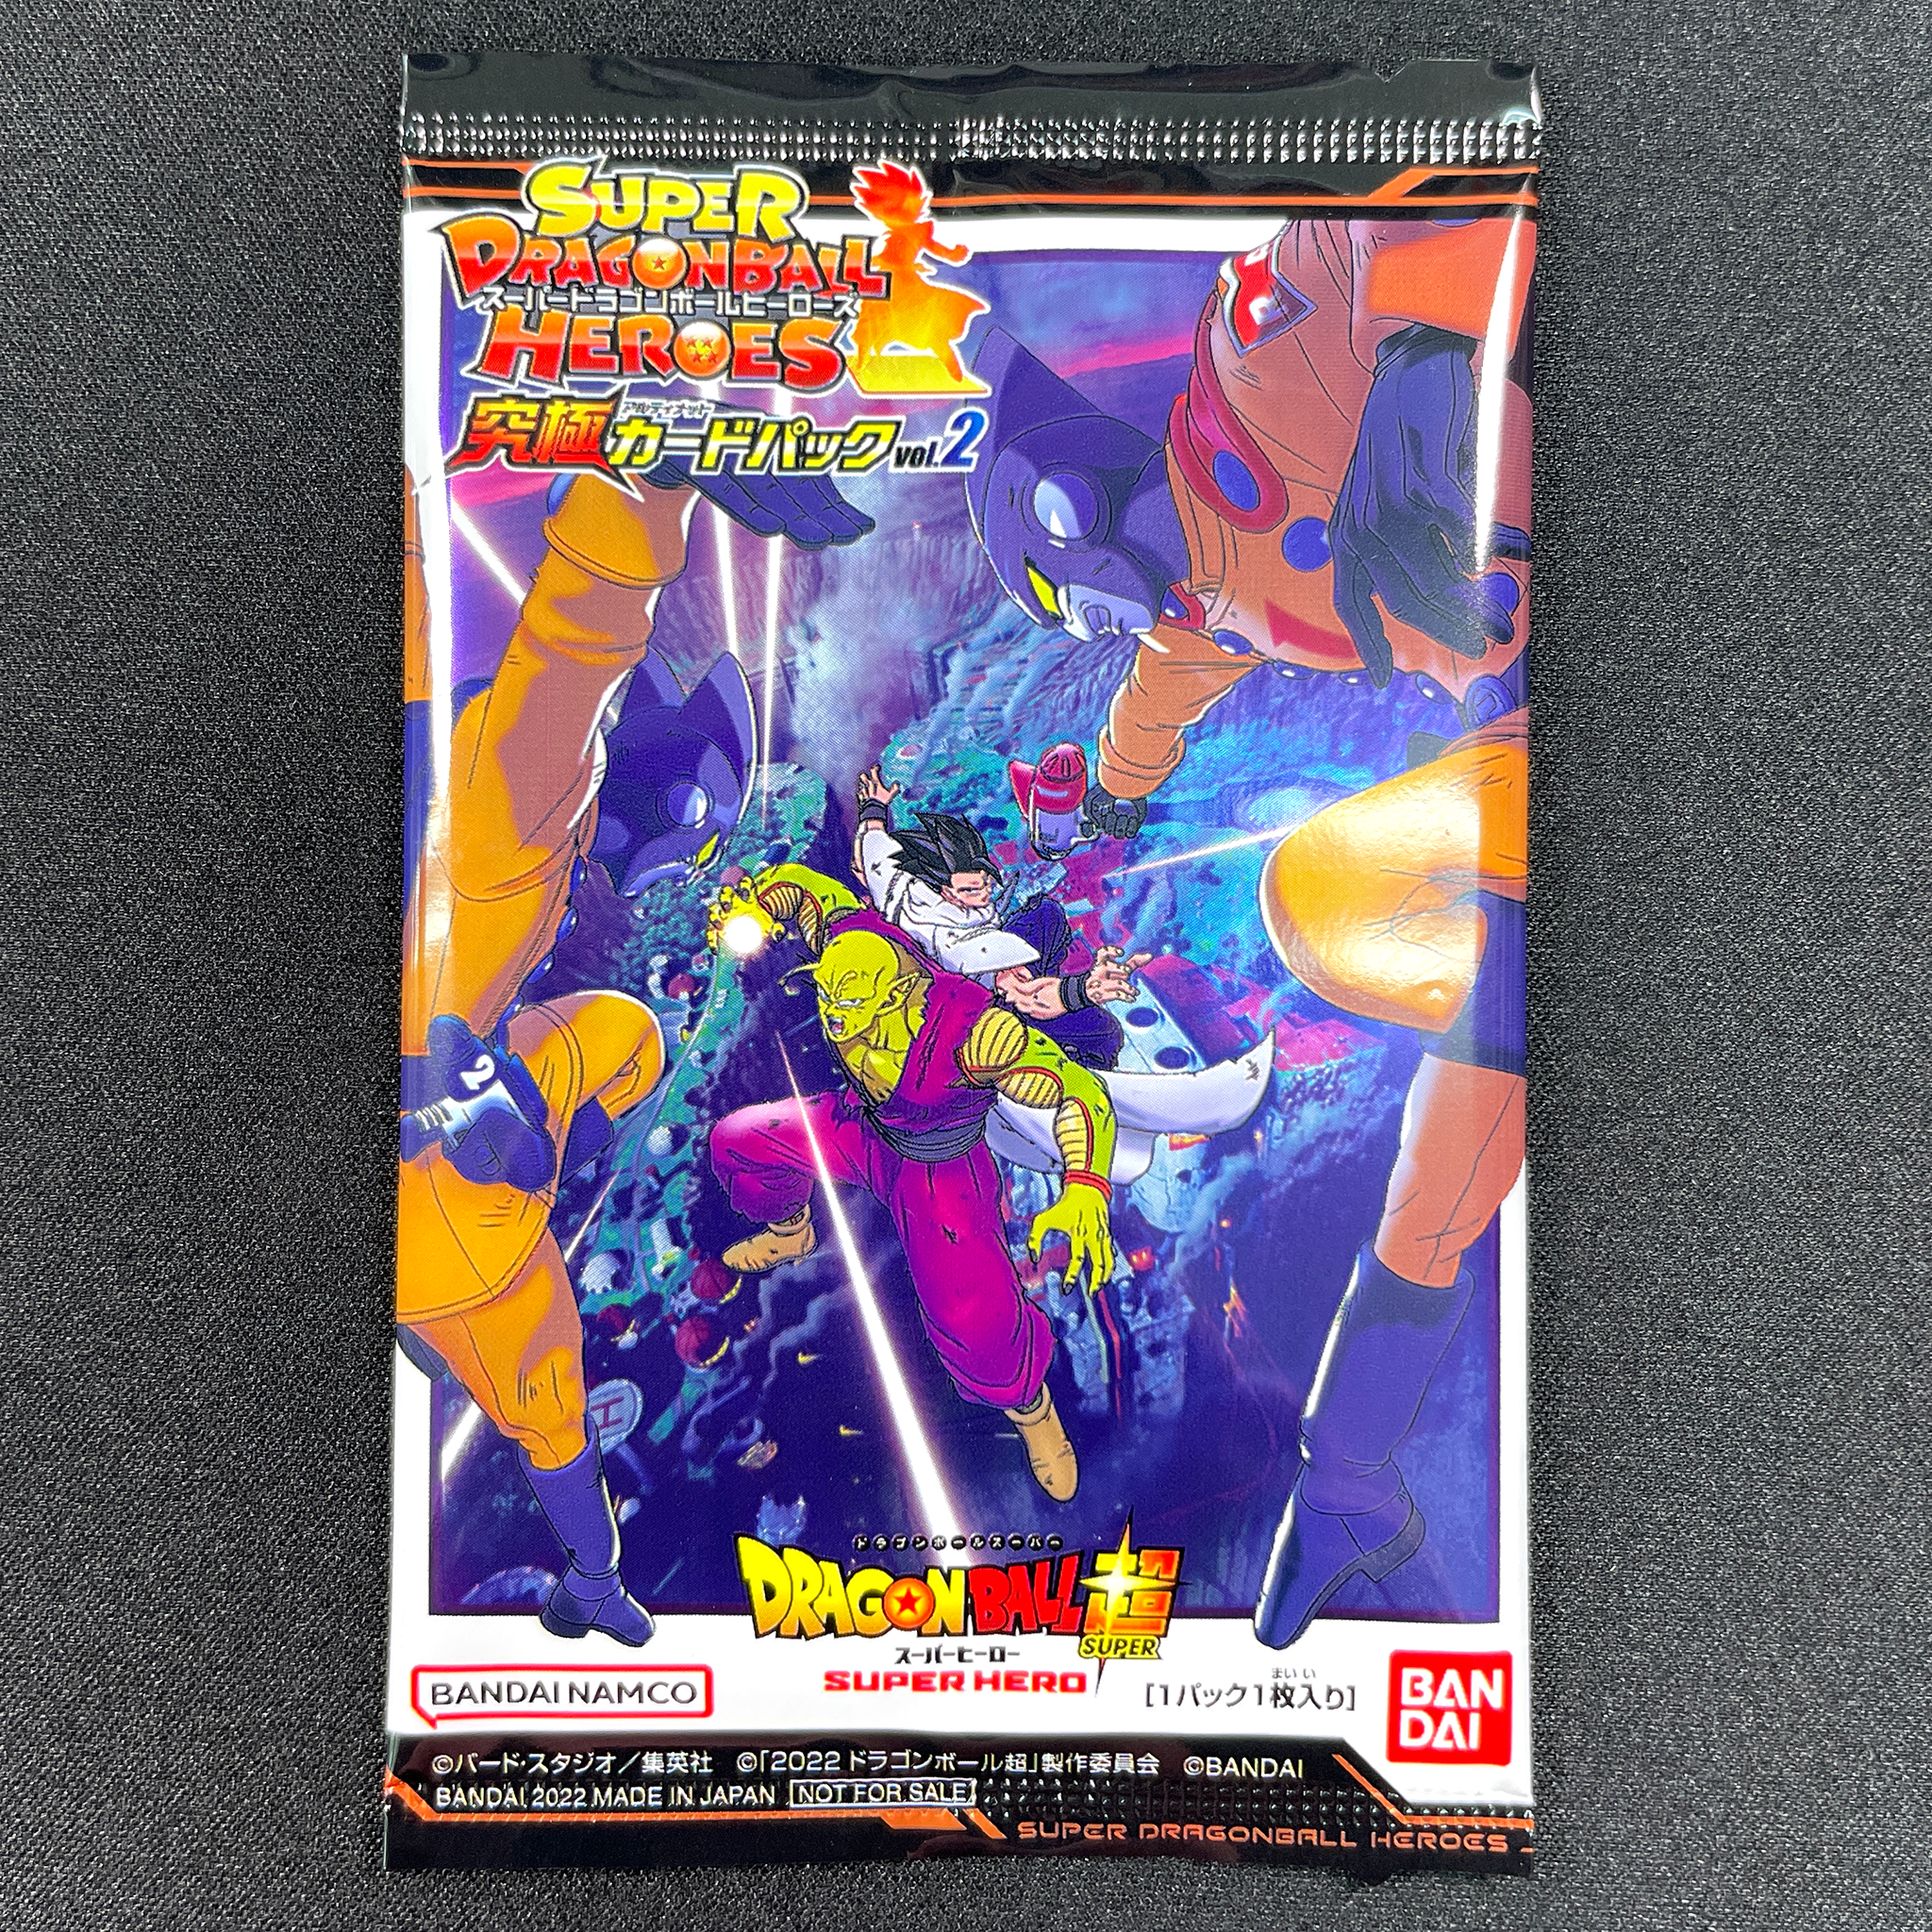 SUPER DRAGON BALL HEROES ULTIMATE CARD PACK DRAGON BALL SUPER SUPER HERO  UGMSH-03 Son Gohan : SH  Promotional card given at the entrance of the movie DRAGON BALL SUPER SUPER HERO in Japanese theaters from July 23 2022.  Product for collectors who want to keep sealed pack.